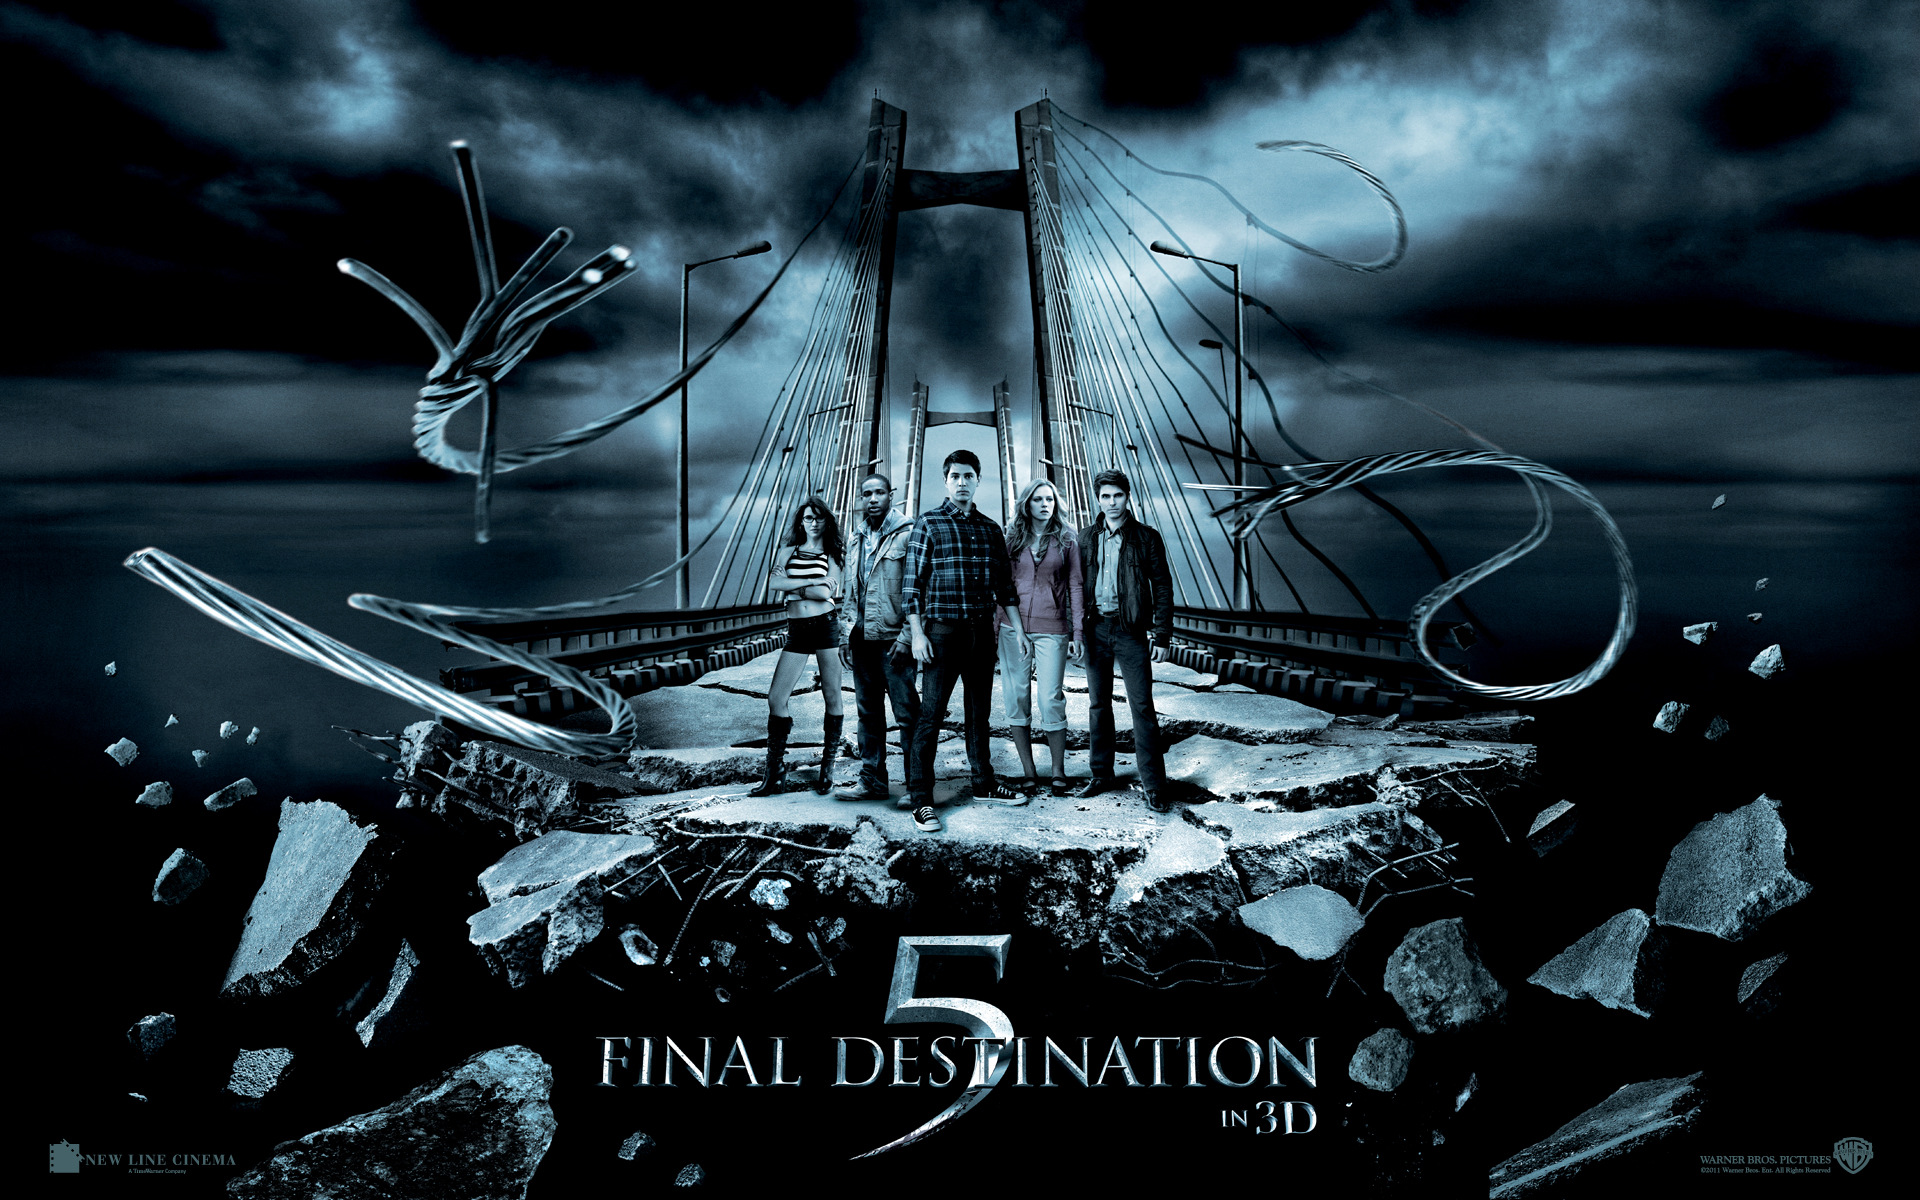 final destination 4 full movie for free